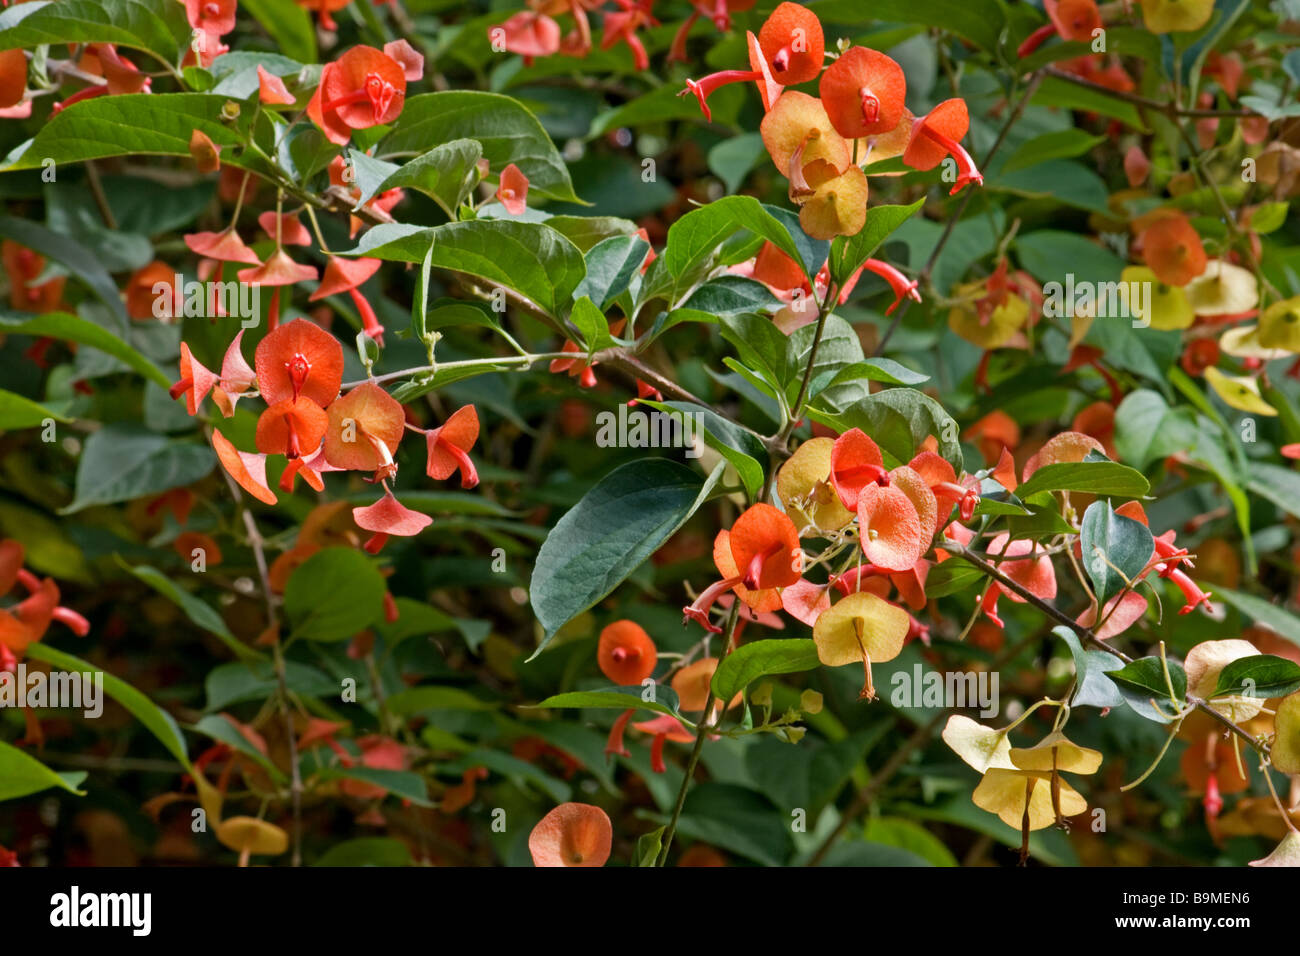 Chinese hat plant in bloom Stock Photo